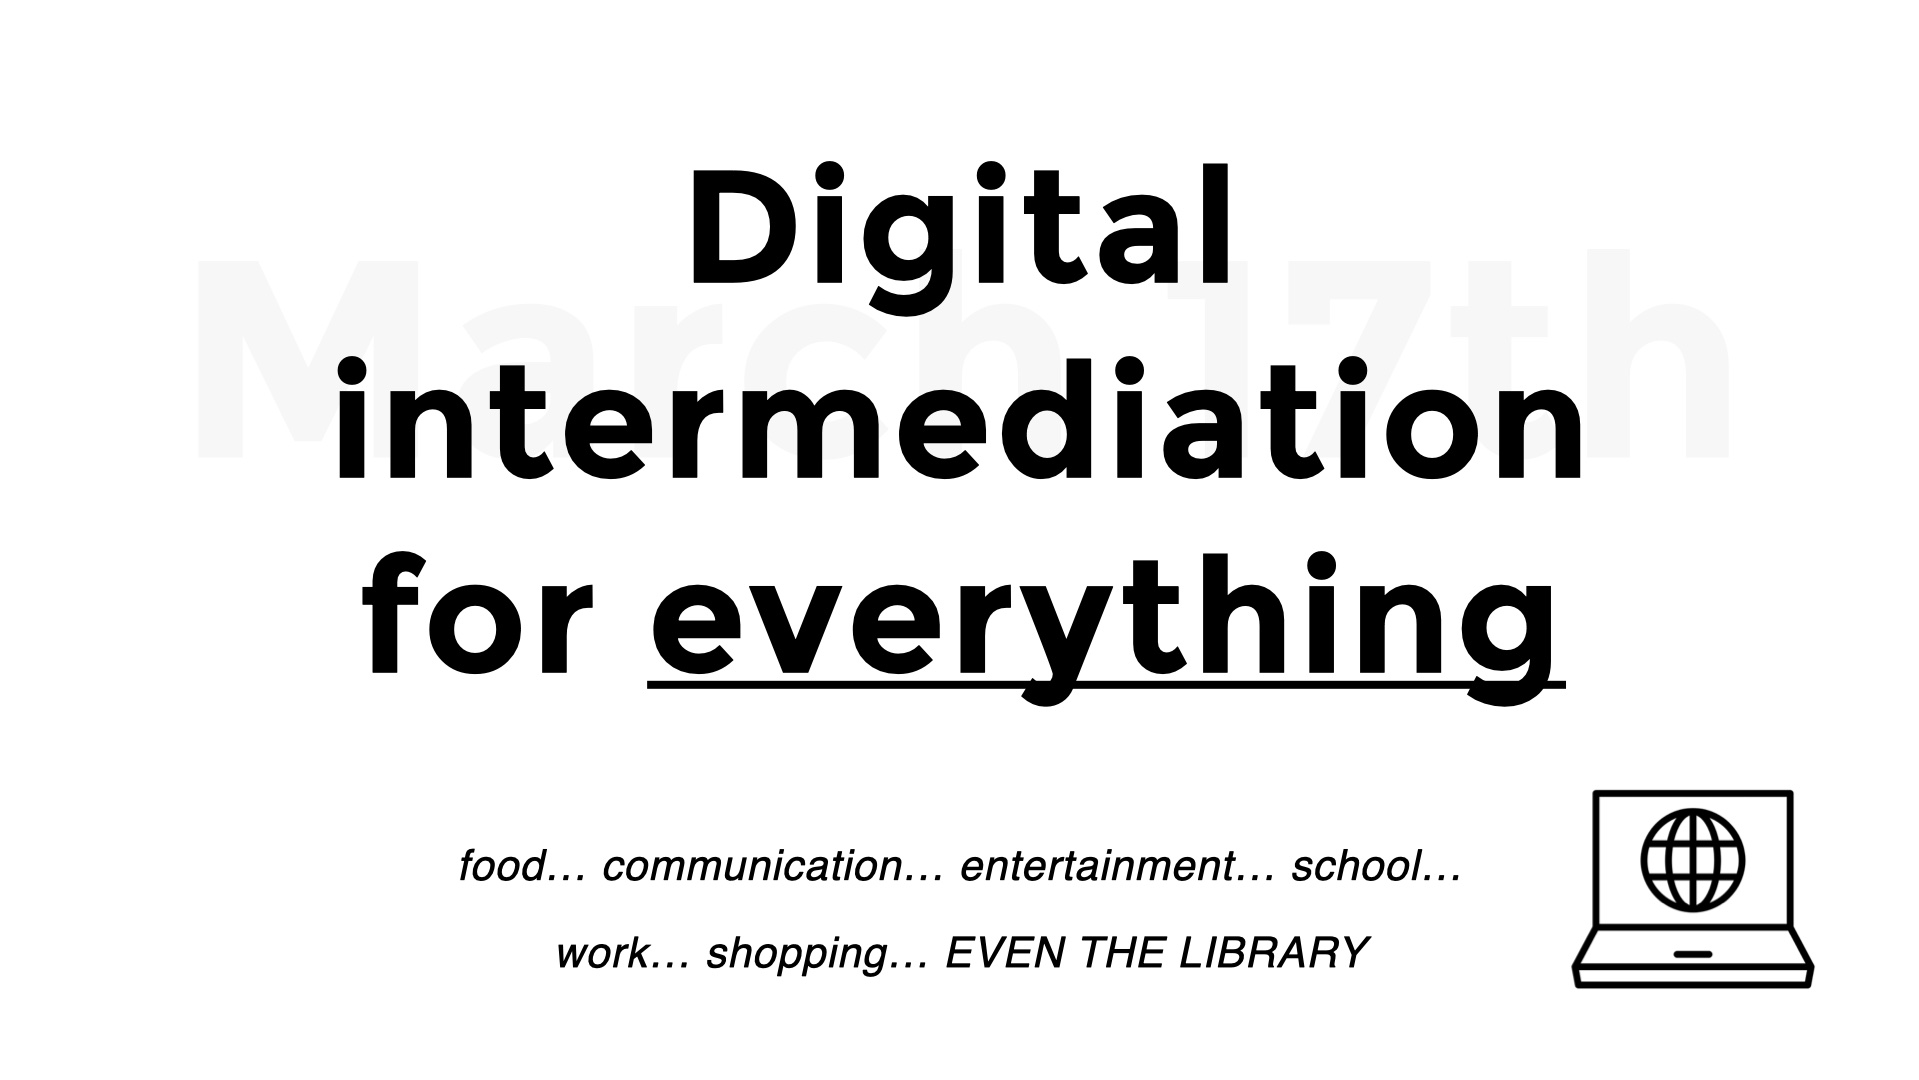 Slide with large text: Digital intermediation
for everything. Smaller text: food... communication... entertainment... school... work... shopping... EVEN THE LIBRARY